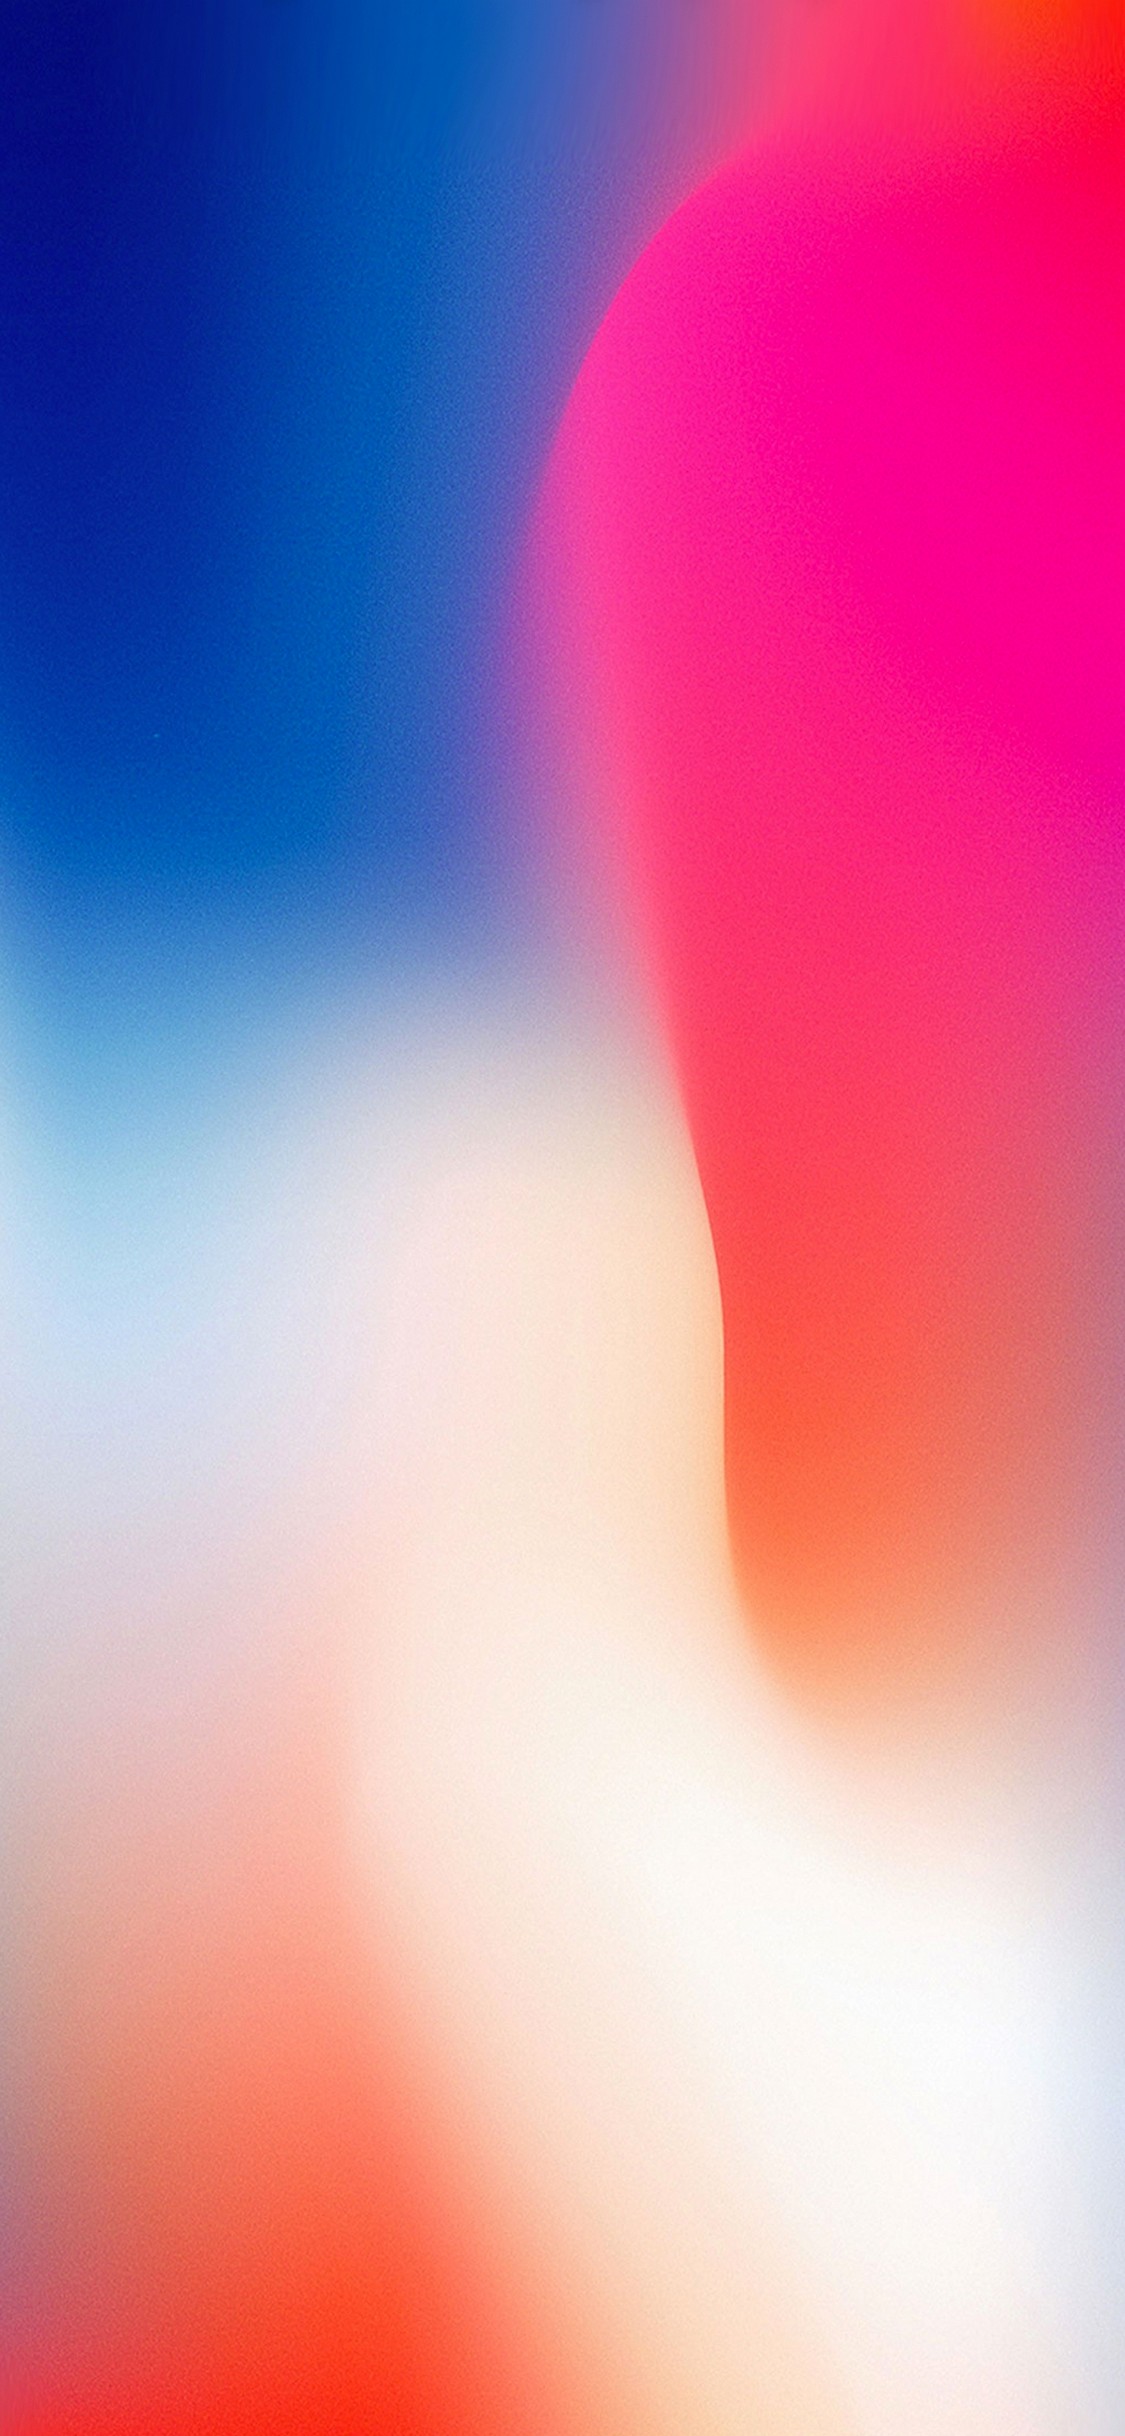 iPhone X Screensaver With high-resolution 1125X2436 pixel. You can set as wallpaper for Apple iPhone X, XS Max, XR, 8, 7, 6, SE, iPad. Enjoy and share your favorite HD wallpapers and background images